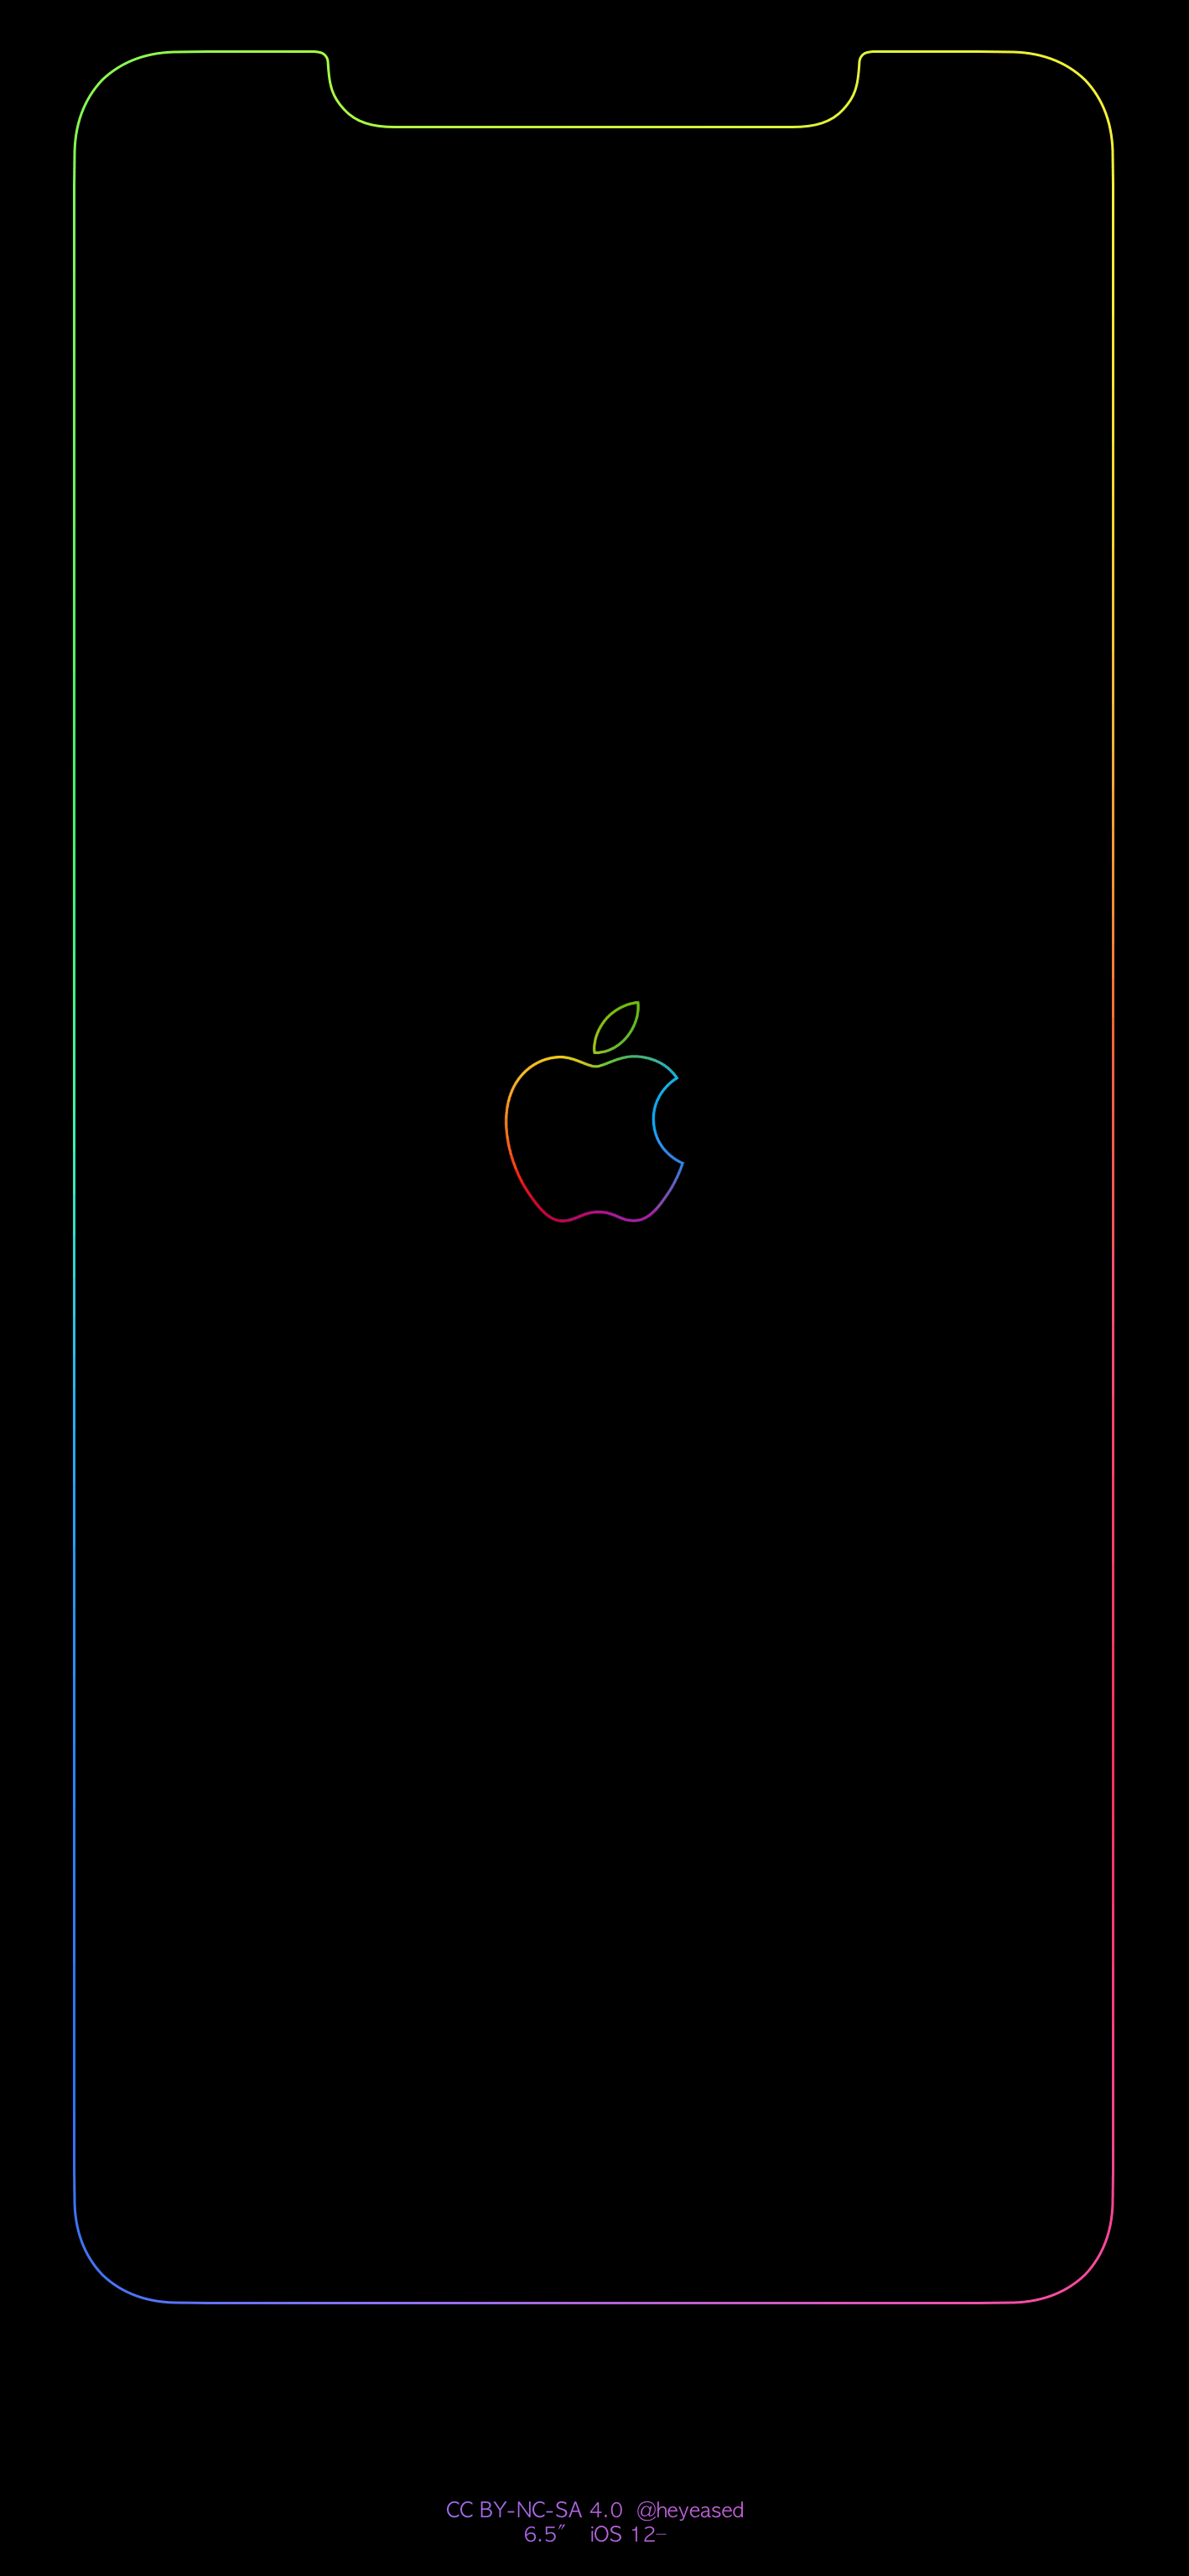 Apple Logo Iphone 12 Pro Max Wallpapers Wallpaper Cave